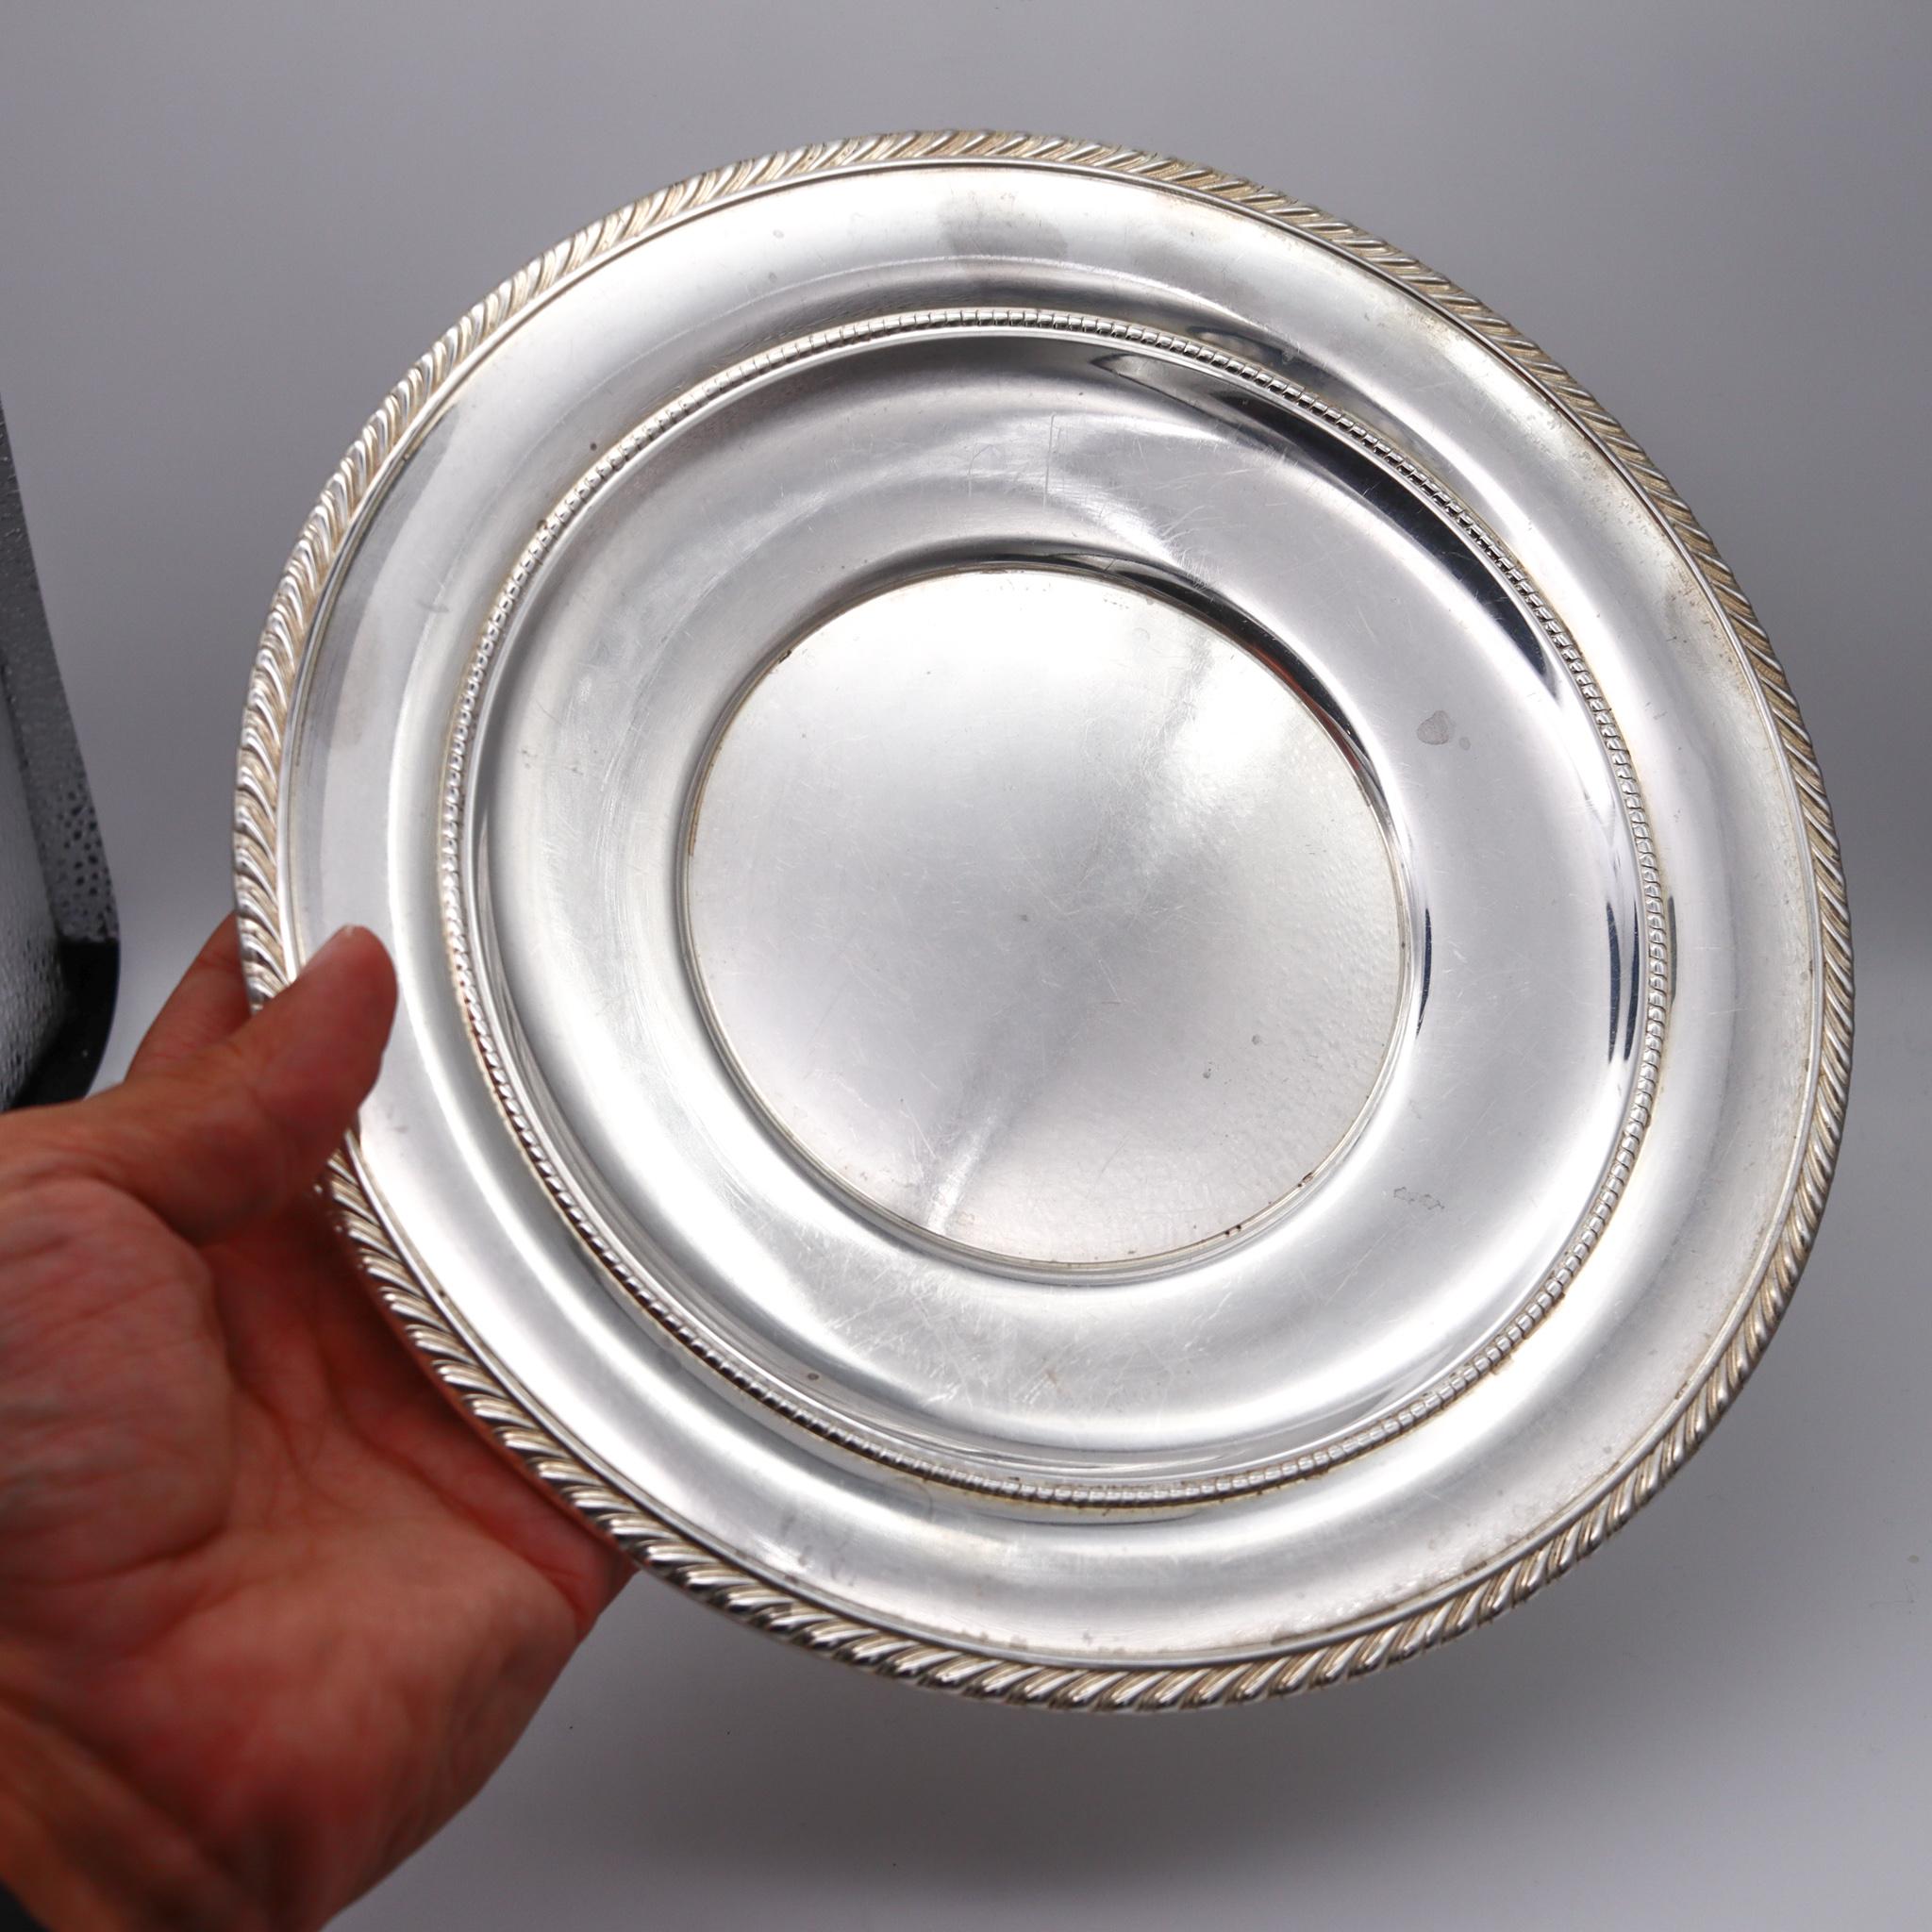 Classic round tray designed by Gorham.

Beautiful vintage American piece from Gorham Company. A large Gadroon model round tray crafted in solid .925/.999 sterling silver, back in the 1960. Designed to be used for sandwiches with a round shaped